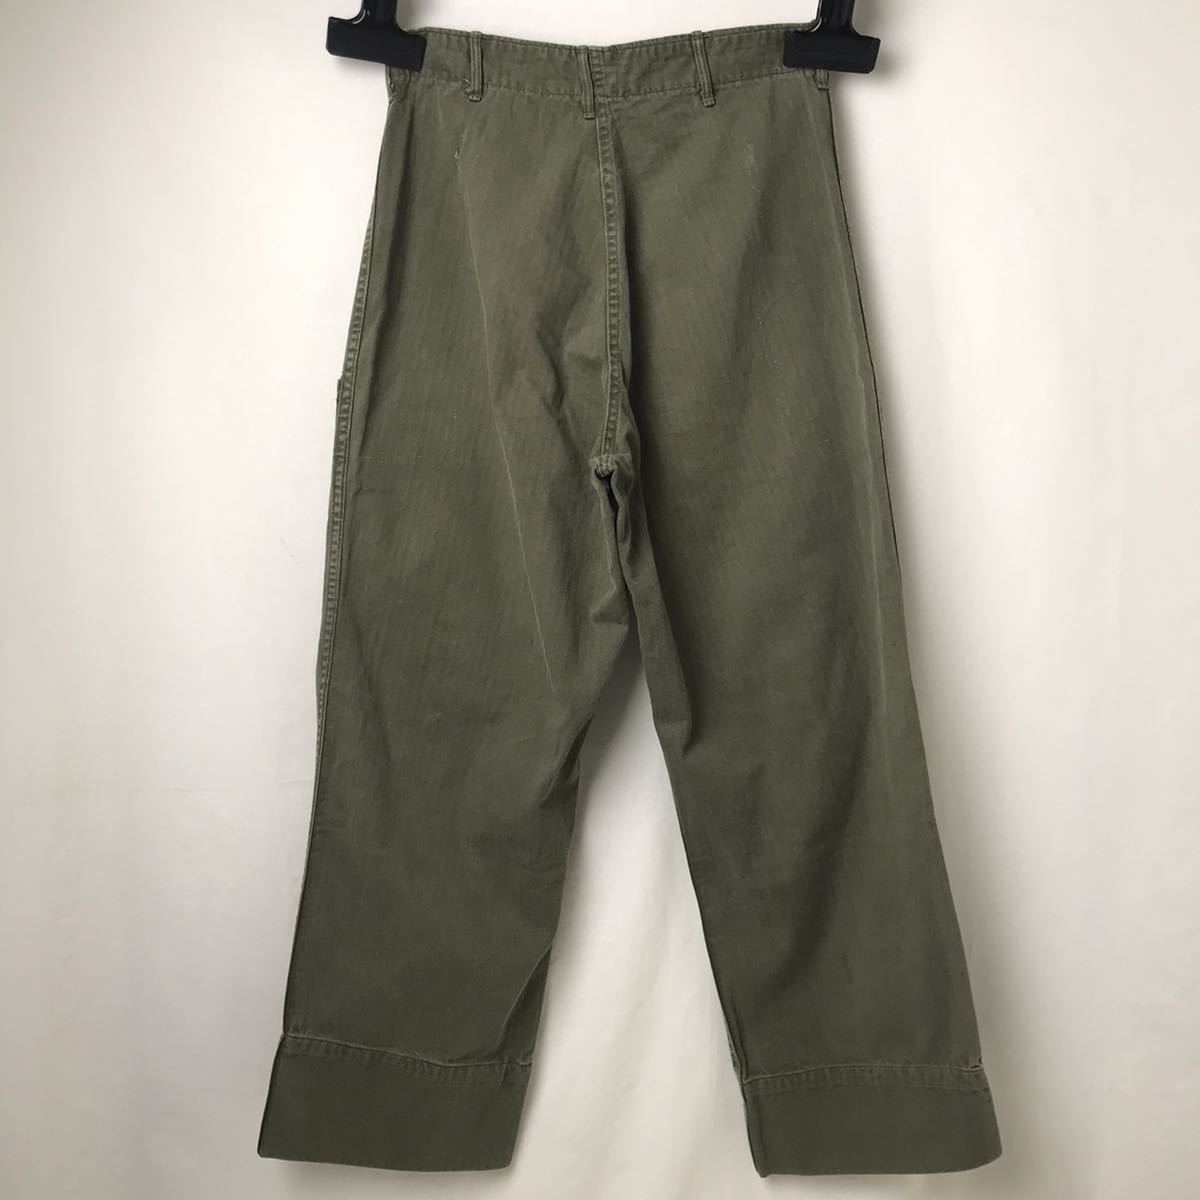 40s50s Vintage military the US armed forces the truth thing M-42 M-43 HBT cargo pants at that time remake front pocket specification 